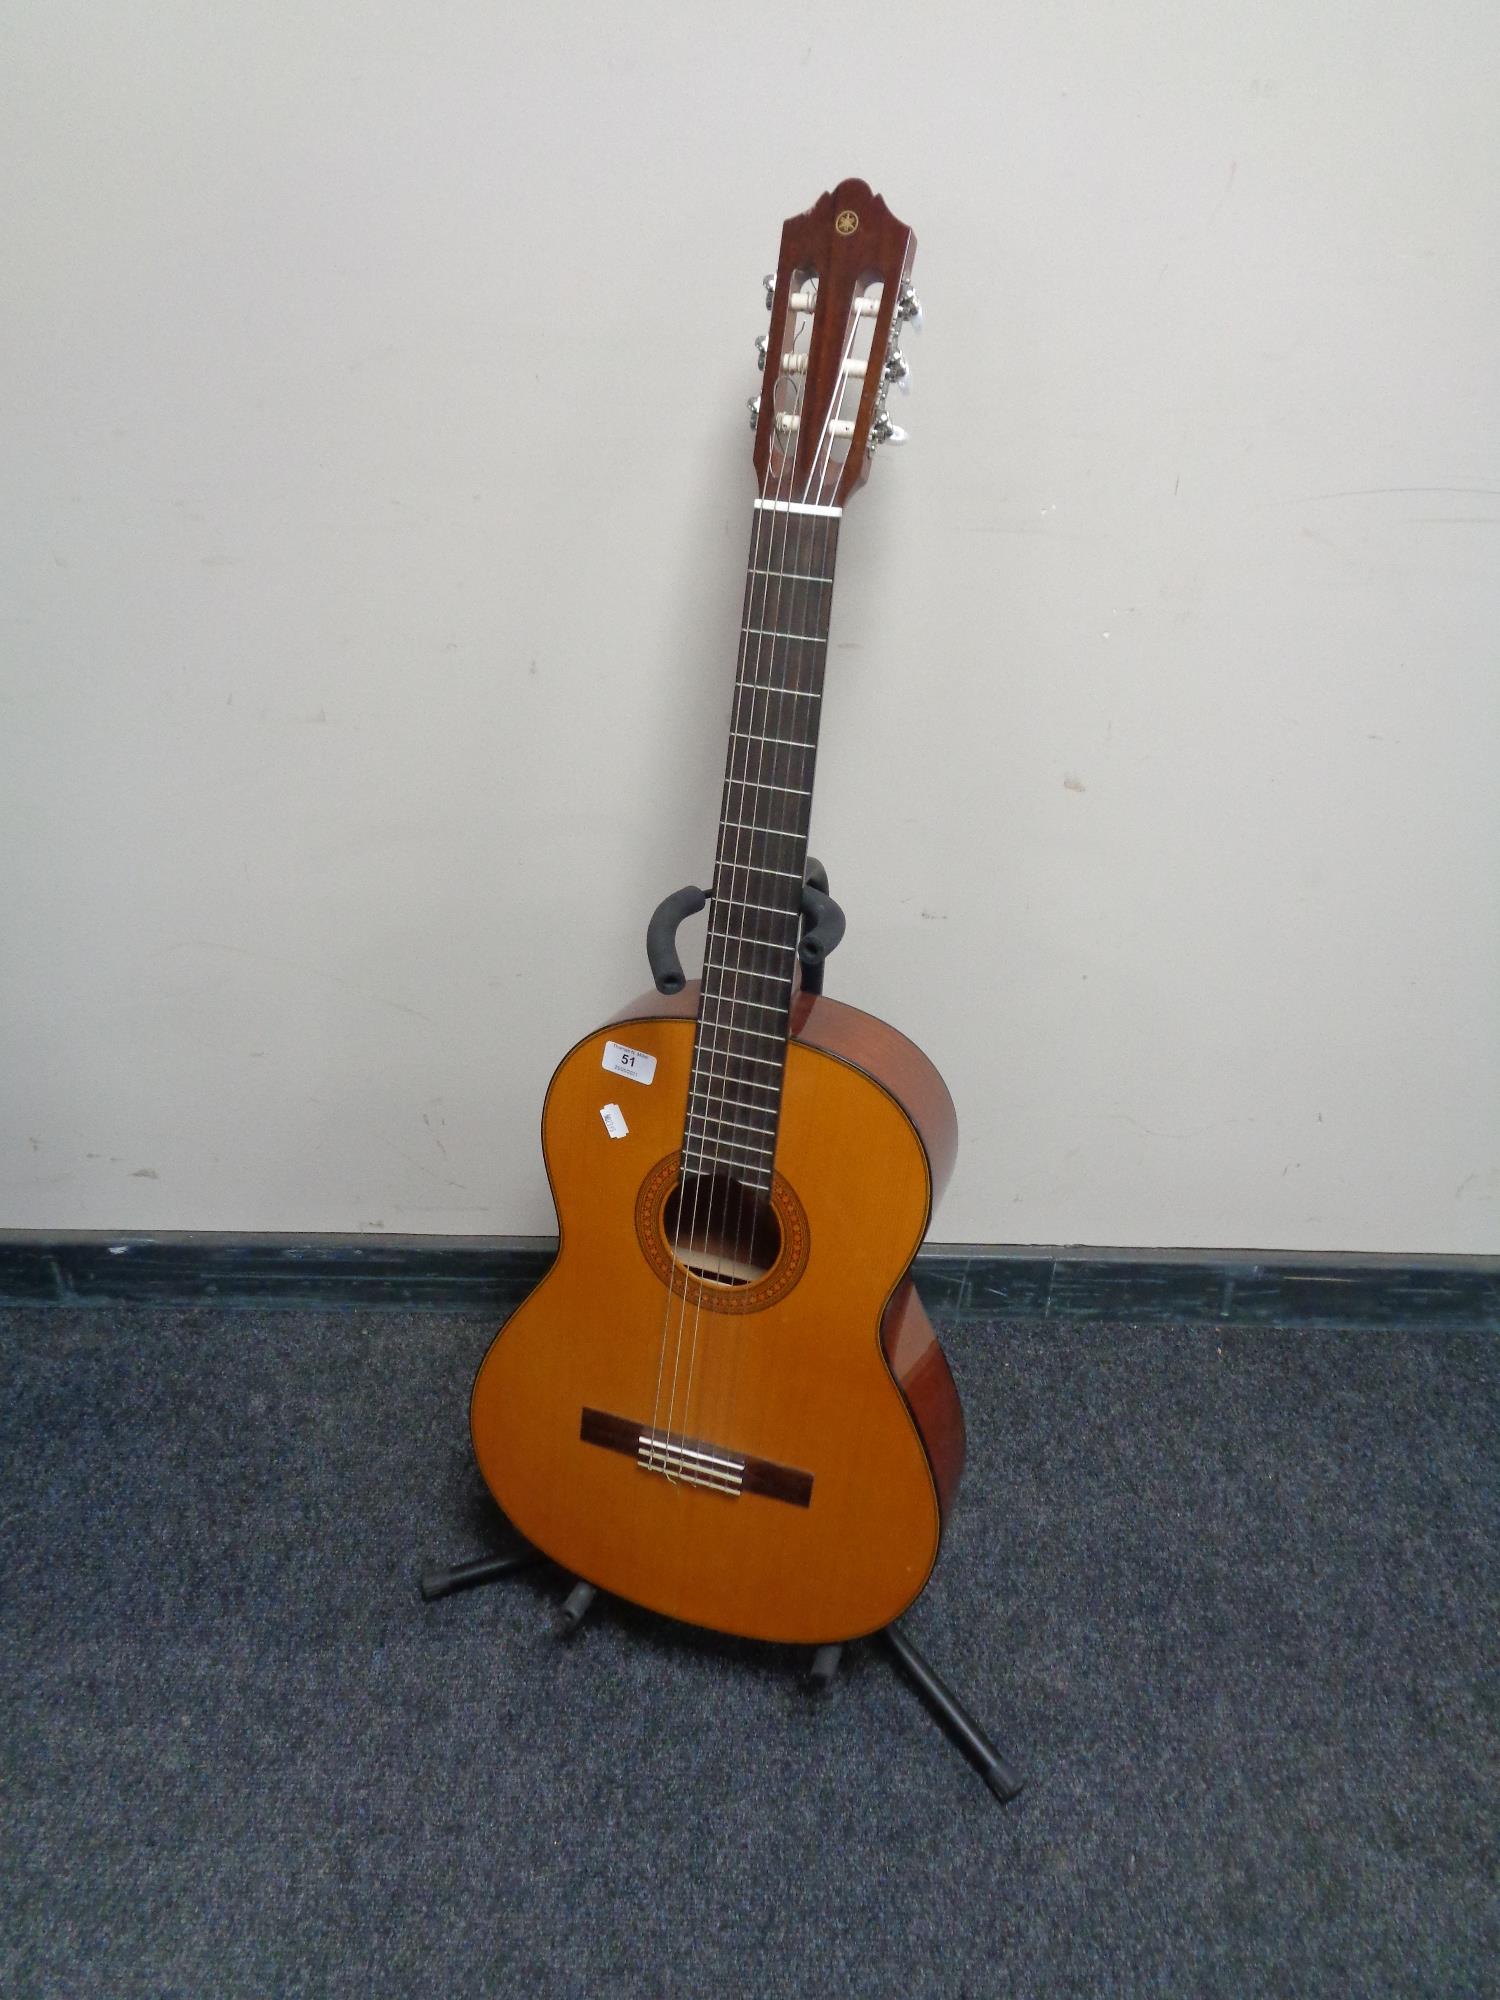 A Yamaha acoustic guitar on stand.